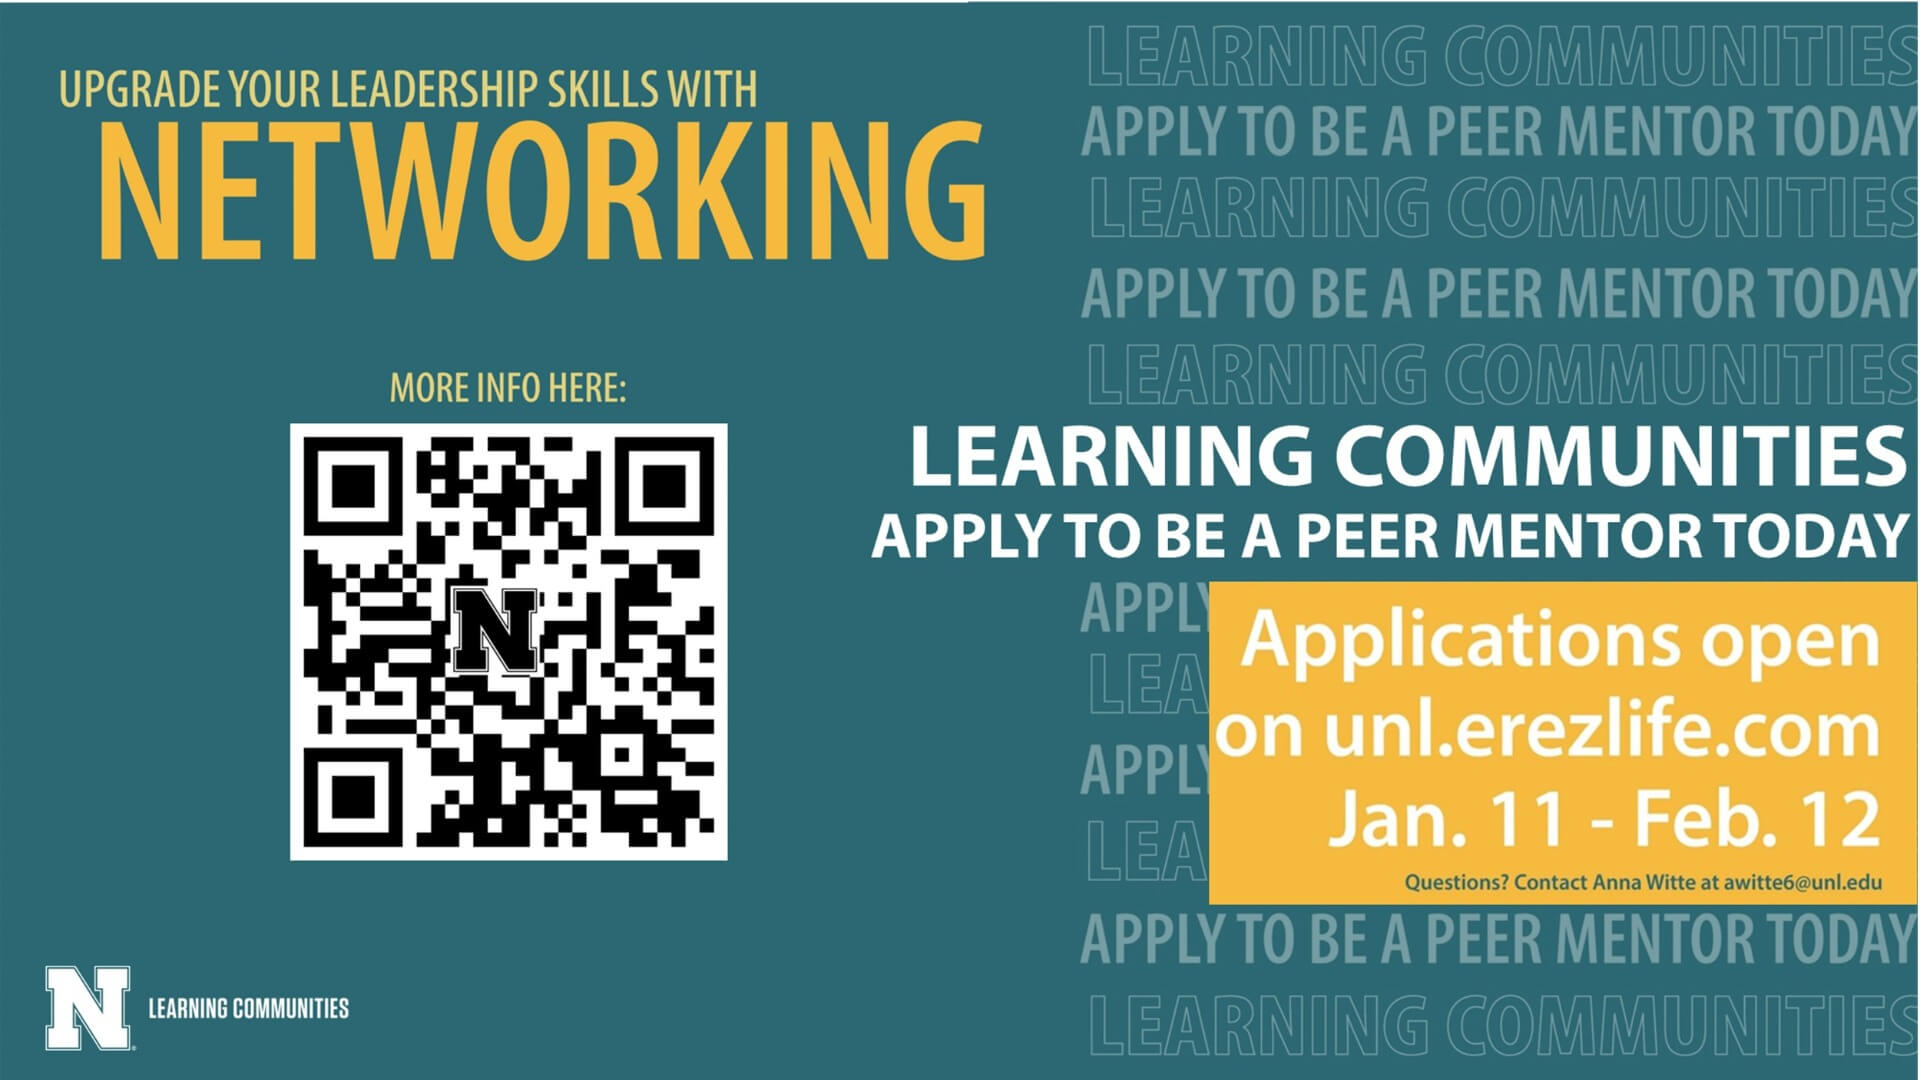 Apply to be a Peer Mentor!